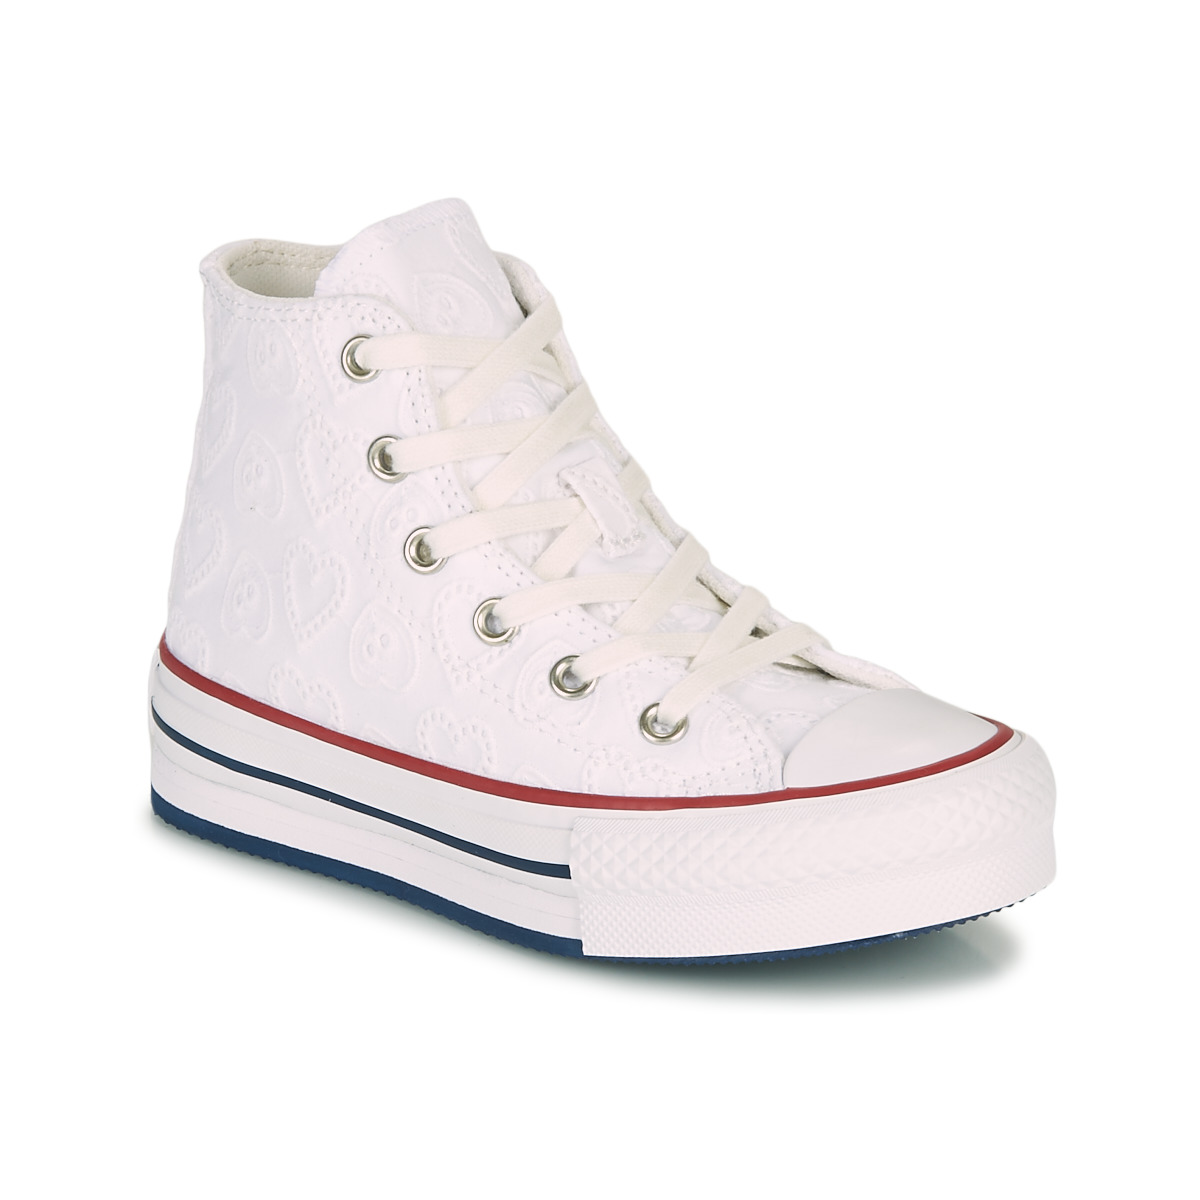 Chaussures Fille Converse Chinatown Market x Pro Leather High CHUCK TAYLOR ALL STAR LIFT LOVE CEREMONY HI Blanc